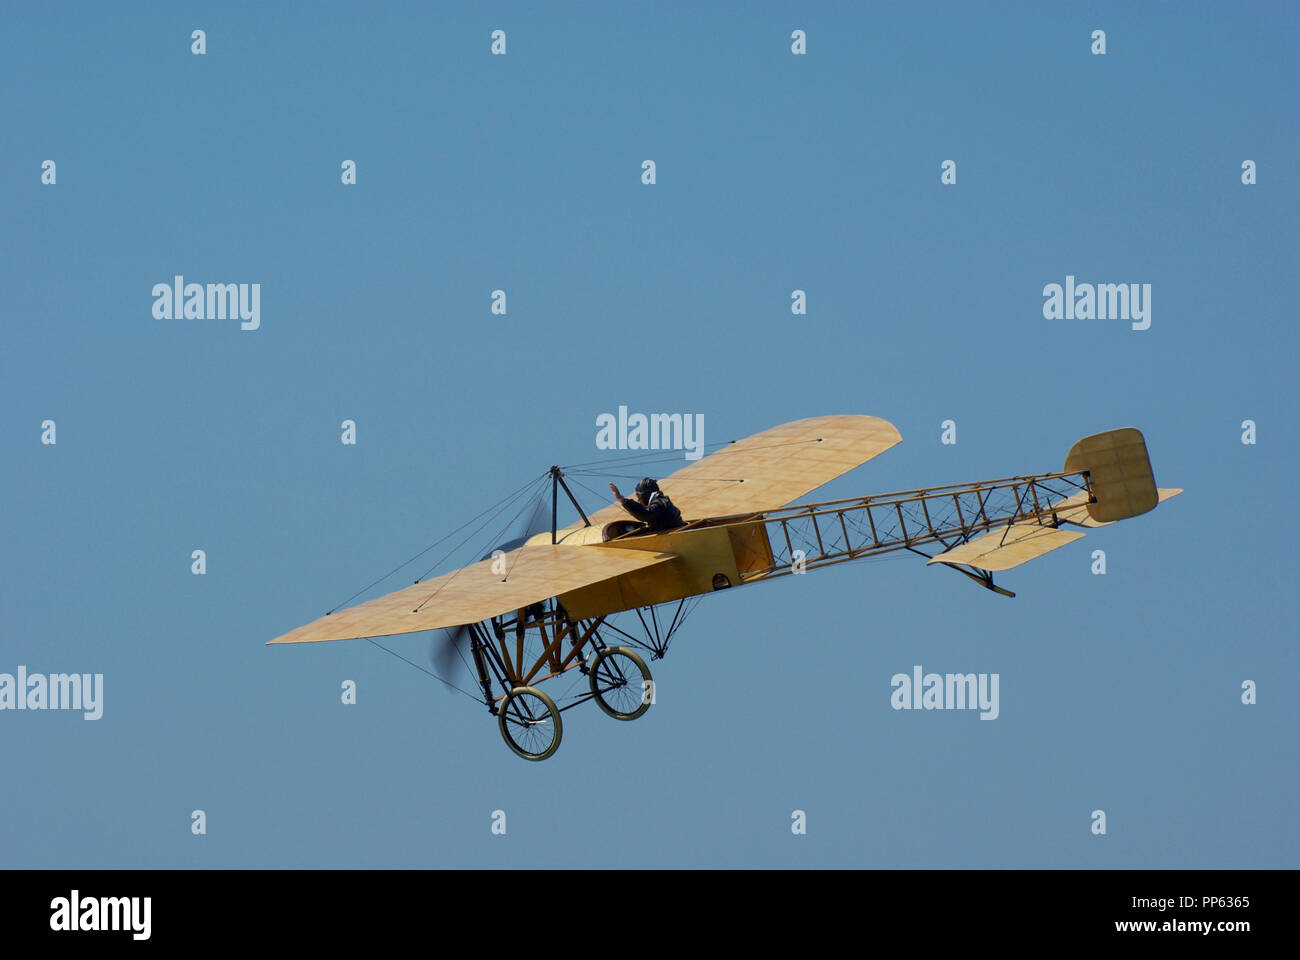 Flying Bleriot XI replica built in Sweden by Mikael Carlsson. Pioneer flying machine by Louis Bleriot from the early days of flight. Blue sky Stock Photo